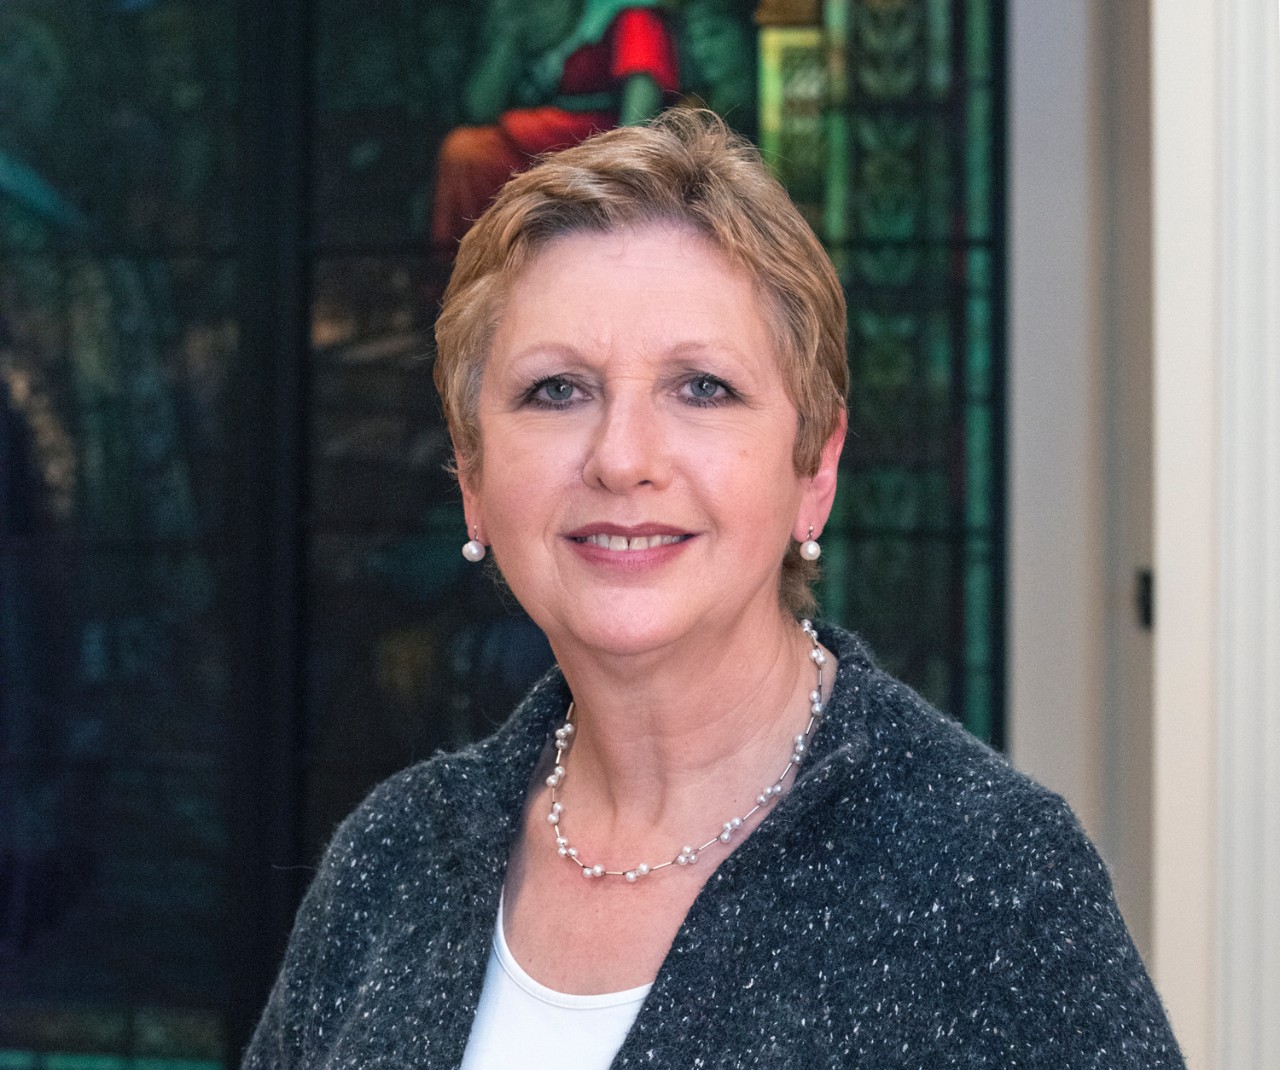 Mary McAleese, former president of Ireland, served as Burns Scholar in 2013.